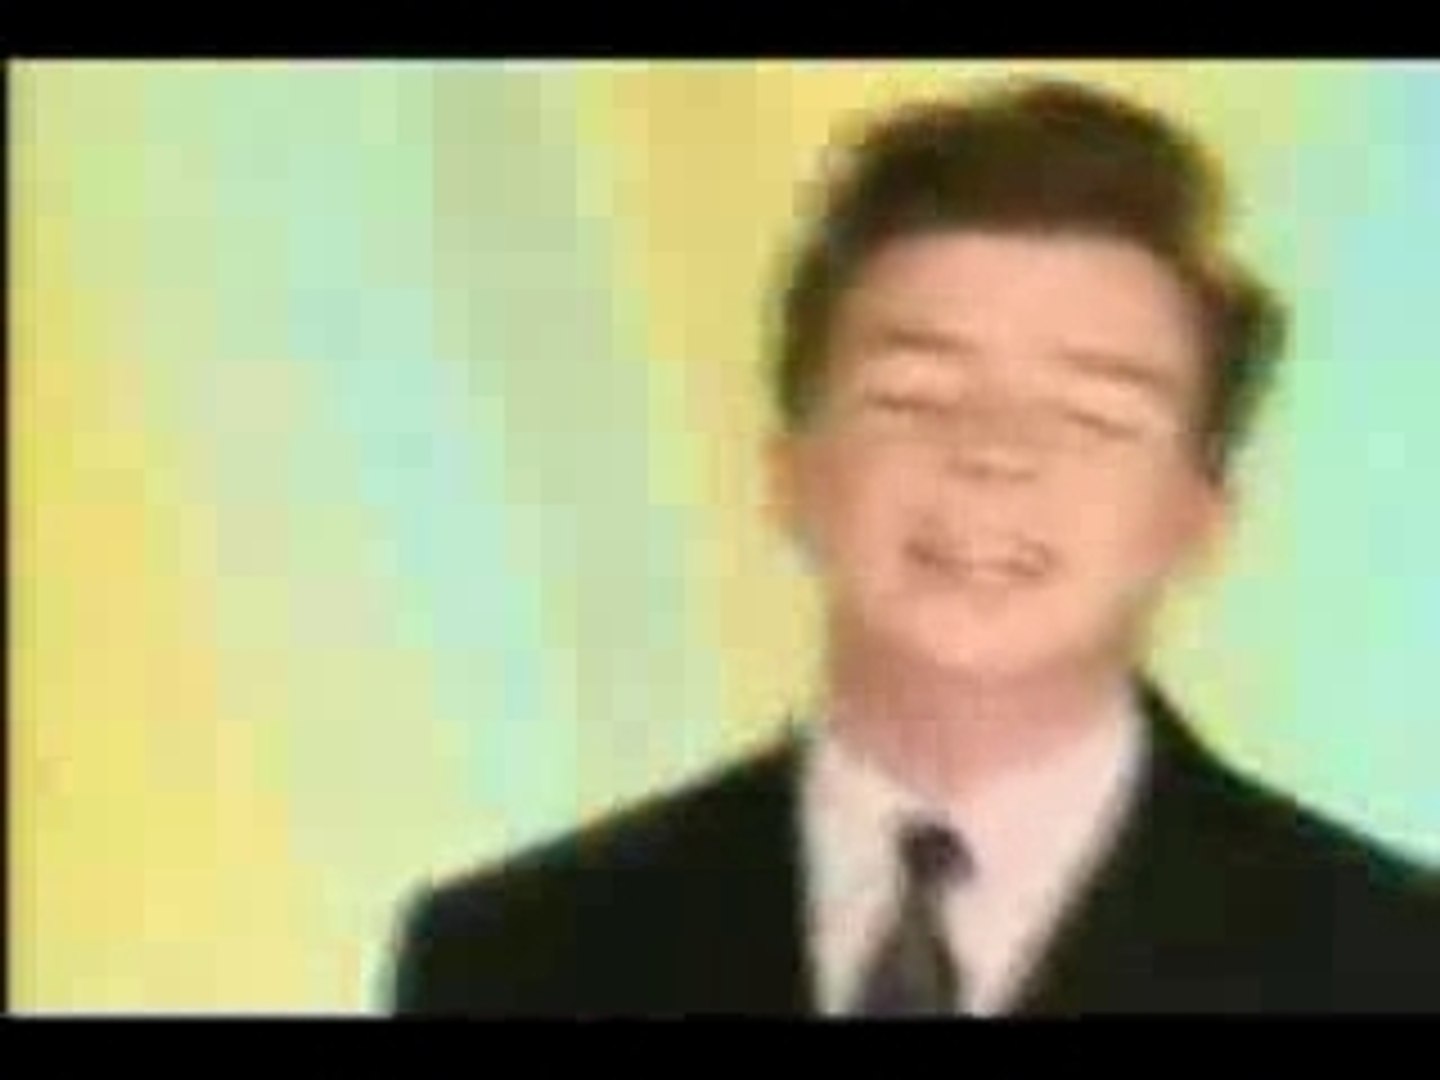 Has Rick Astley ever been Rick-rolled?, Larry King Now